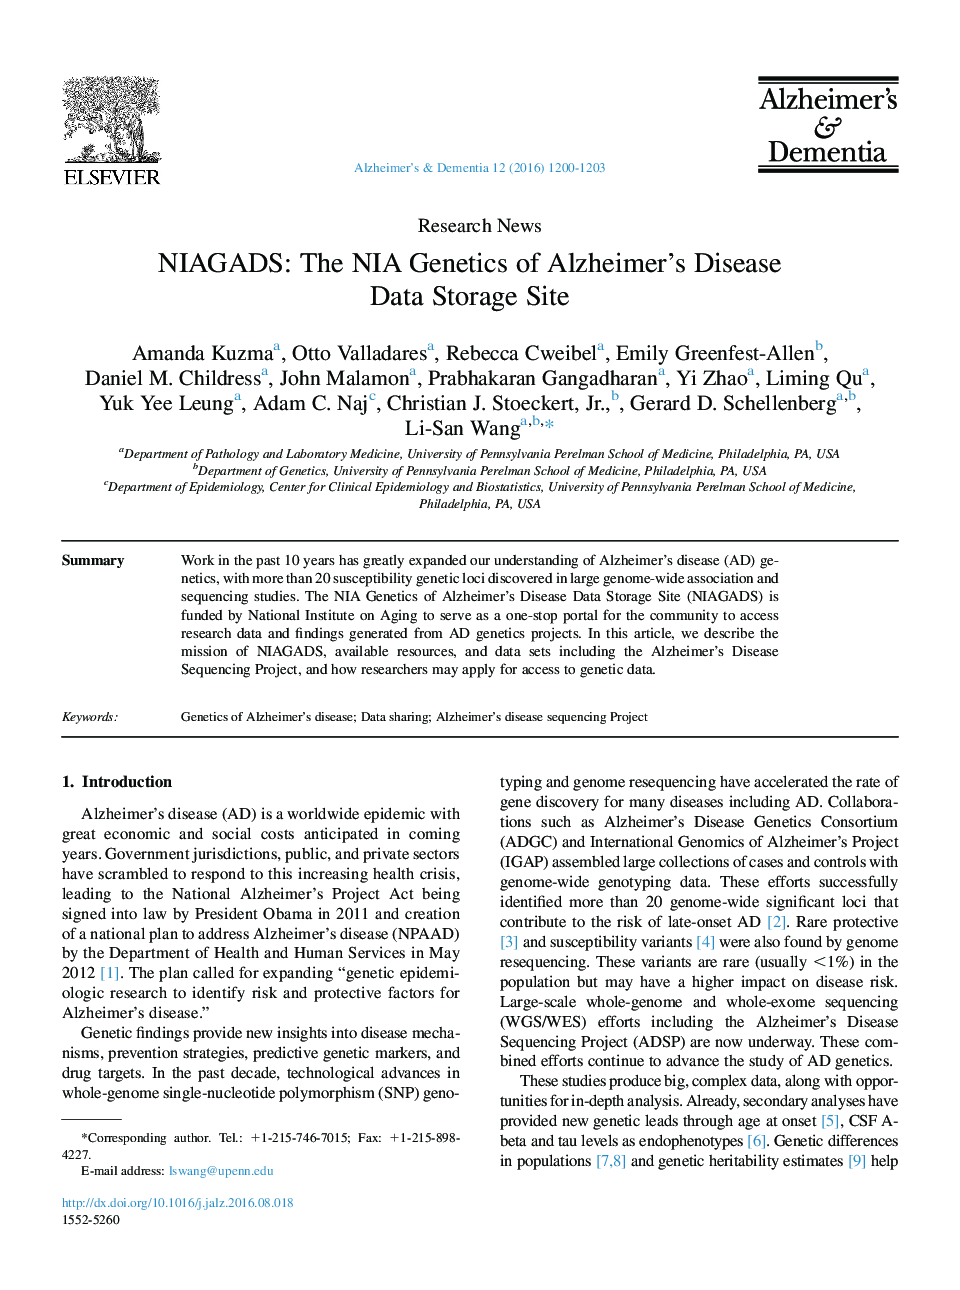 Research NewsNIAGADS: The NIA Genetics of Alzheimer's Disease Data Storage Site